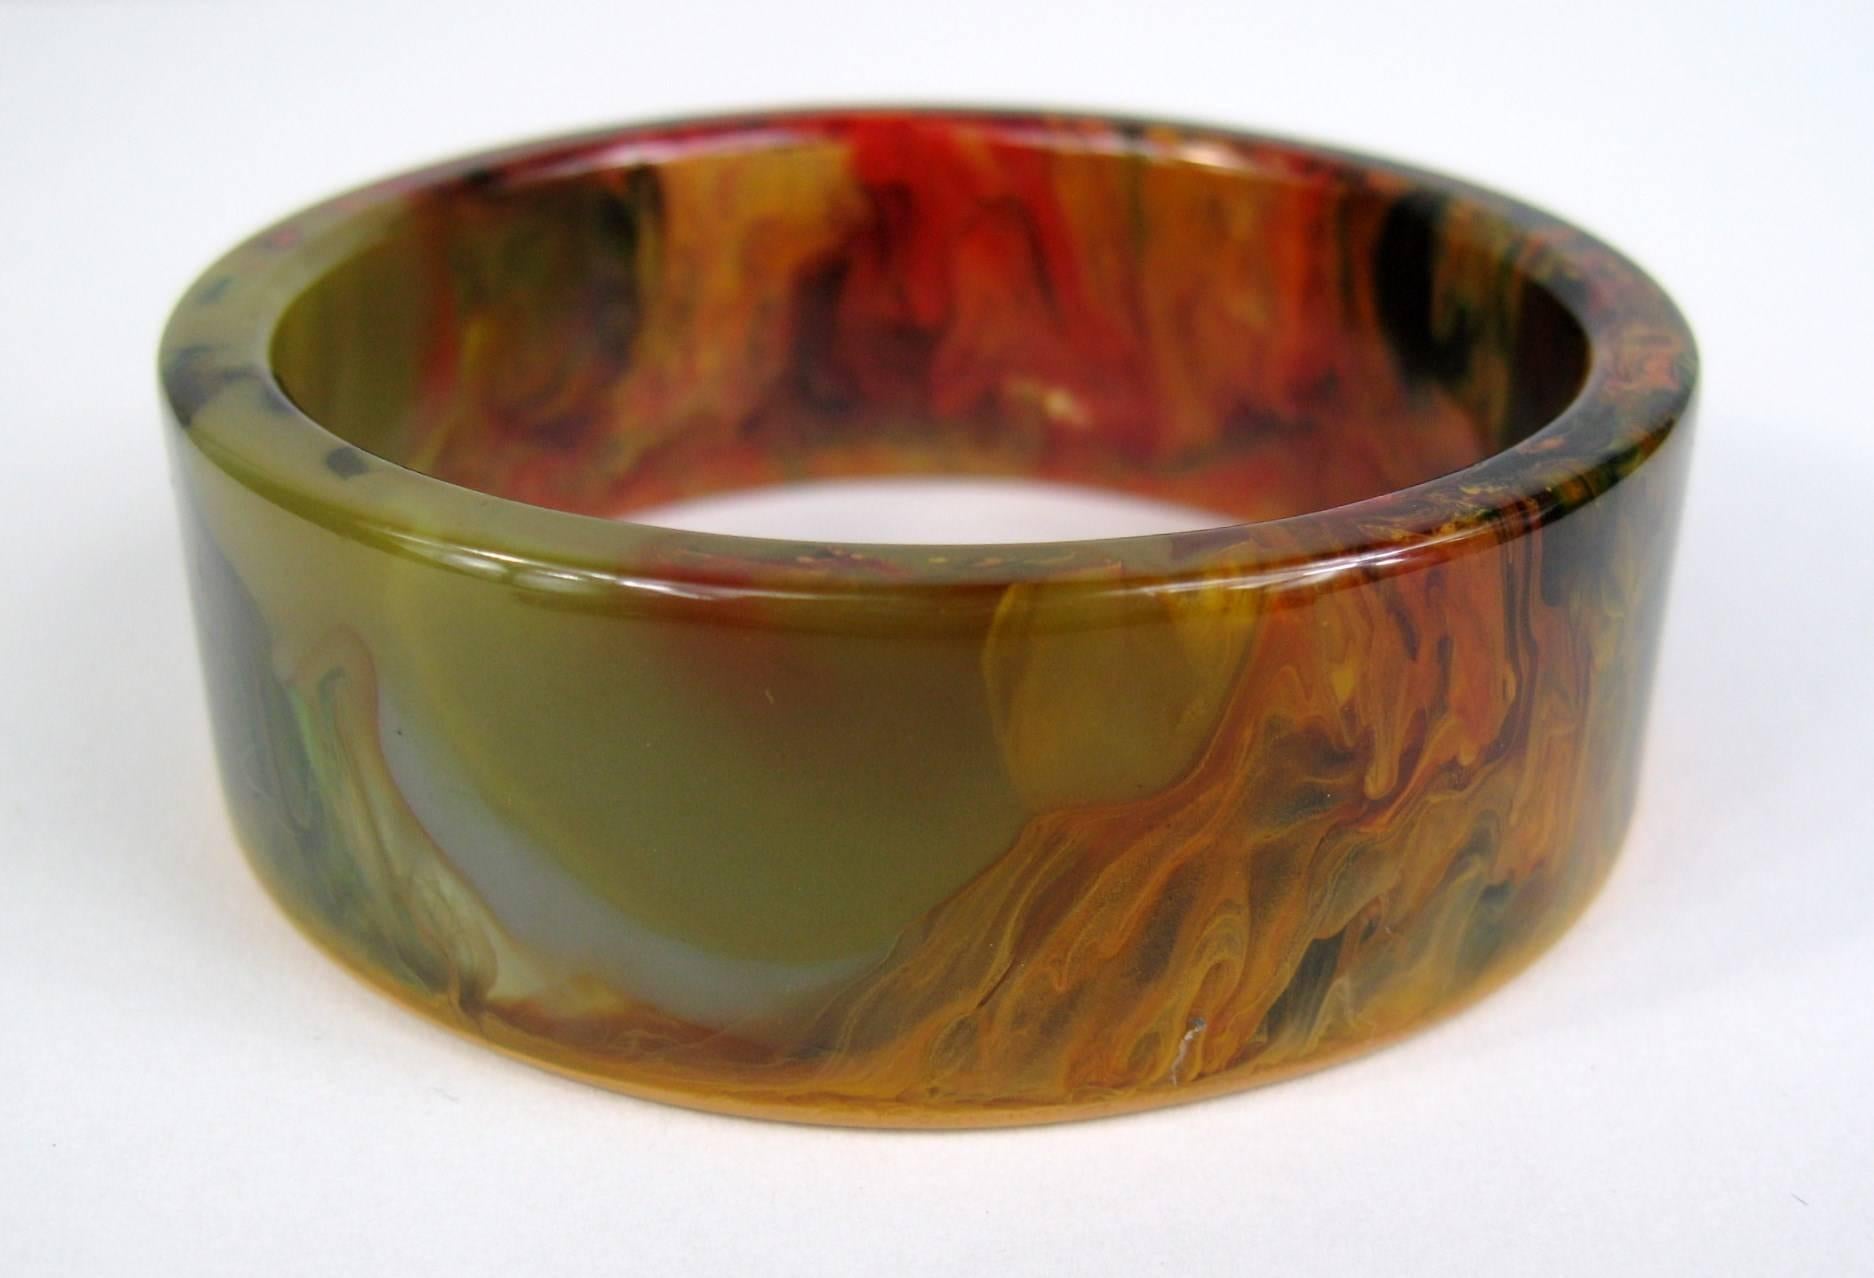 Stunning End of day Bakelite marbled with green, red, yellow and orange. Measuring 1 inch wide with a inner diameter of 64mm. This will fit a 6.5 to 7 inch wrist nicely. This is out of a massive collection of Jewelry from one collector. Be sure to